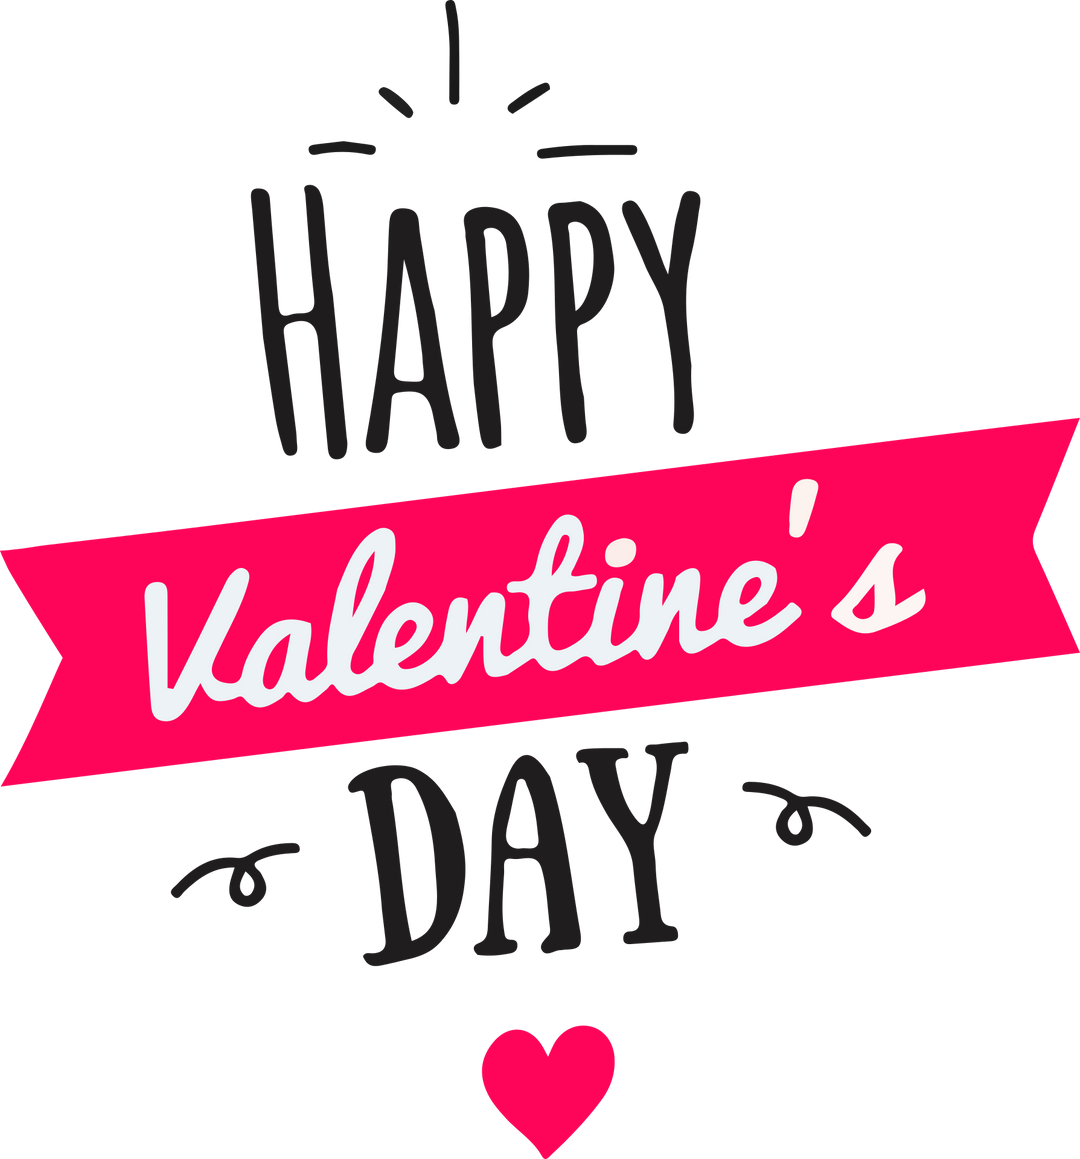 How to Increase Sales And Build A Brand on Valentine's Day?